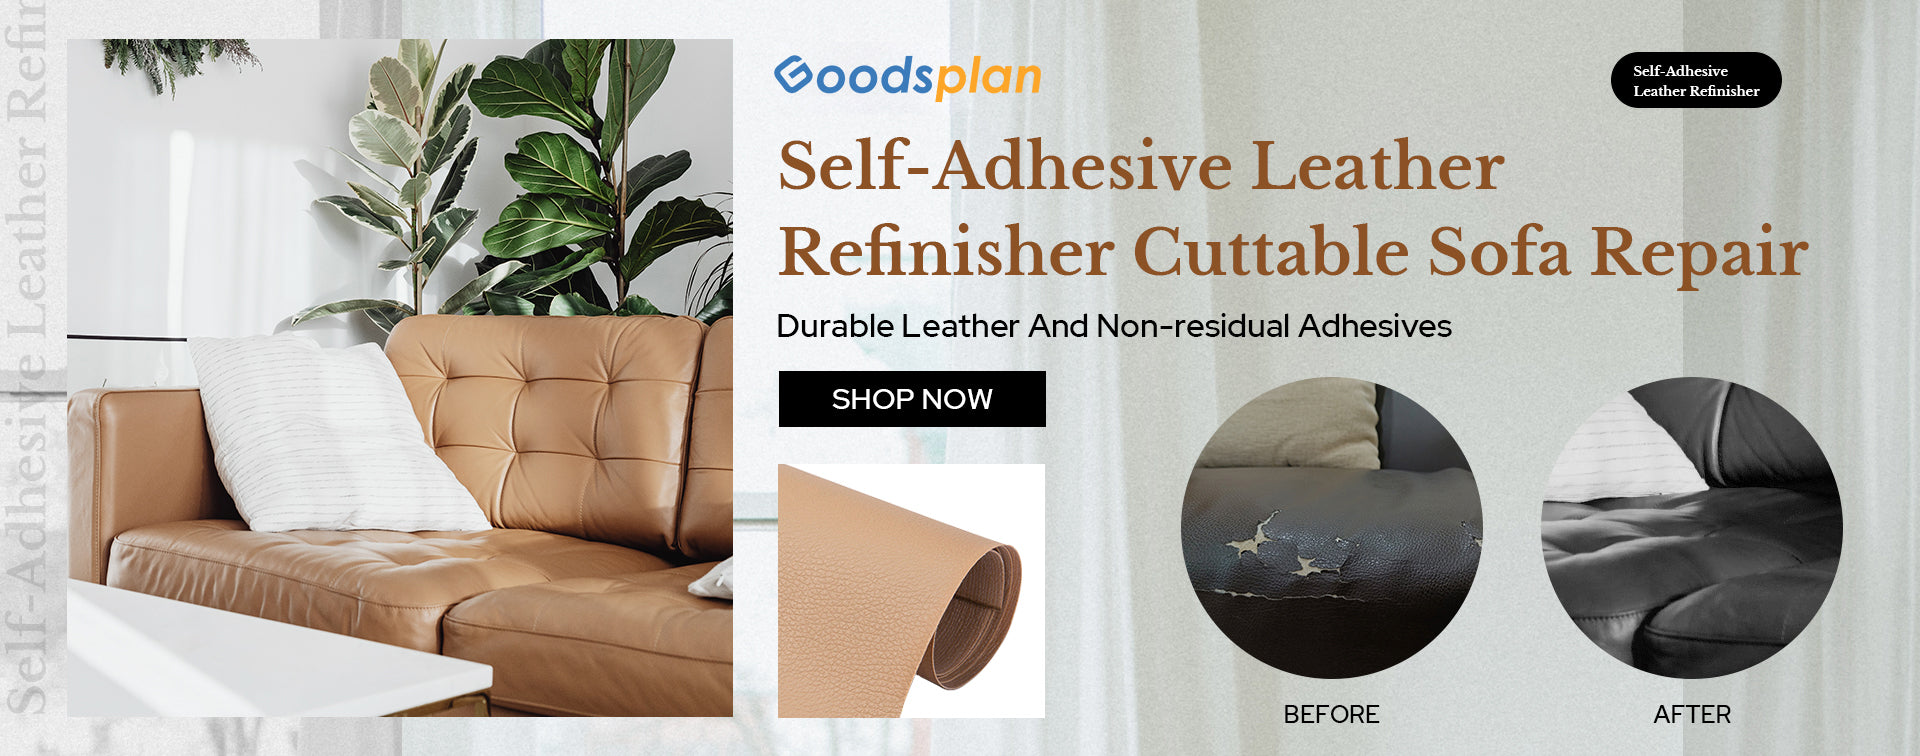 new self-adhesive leather refinisher cuttable sofa repair